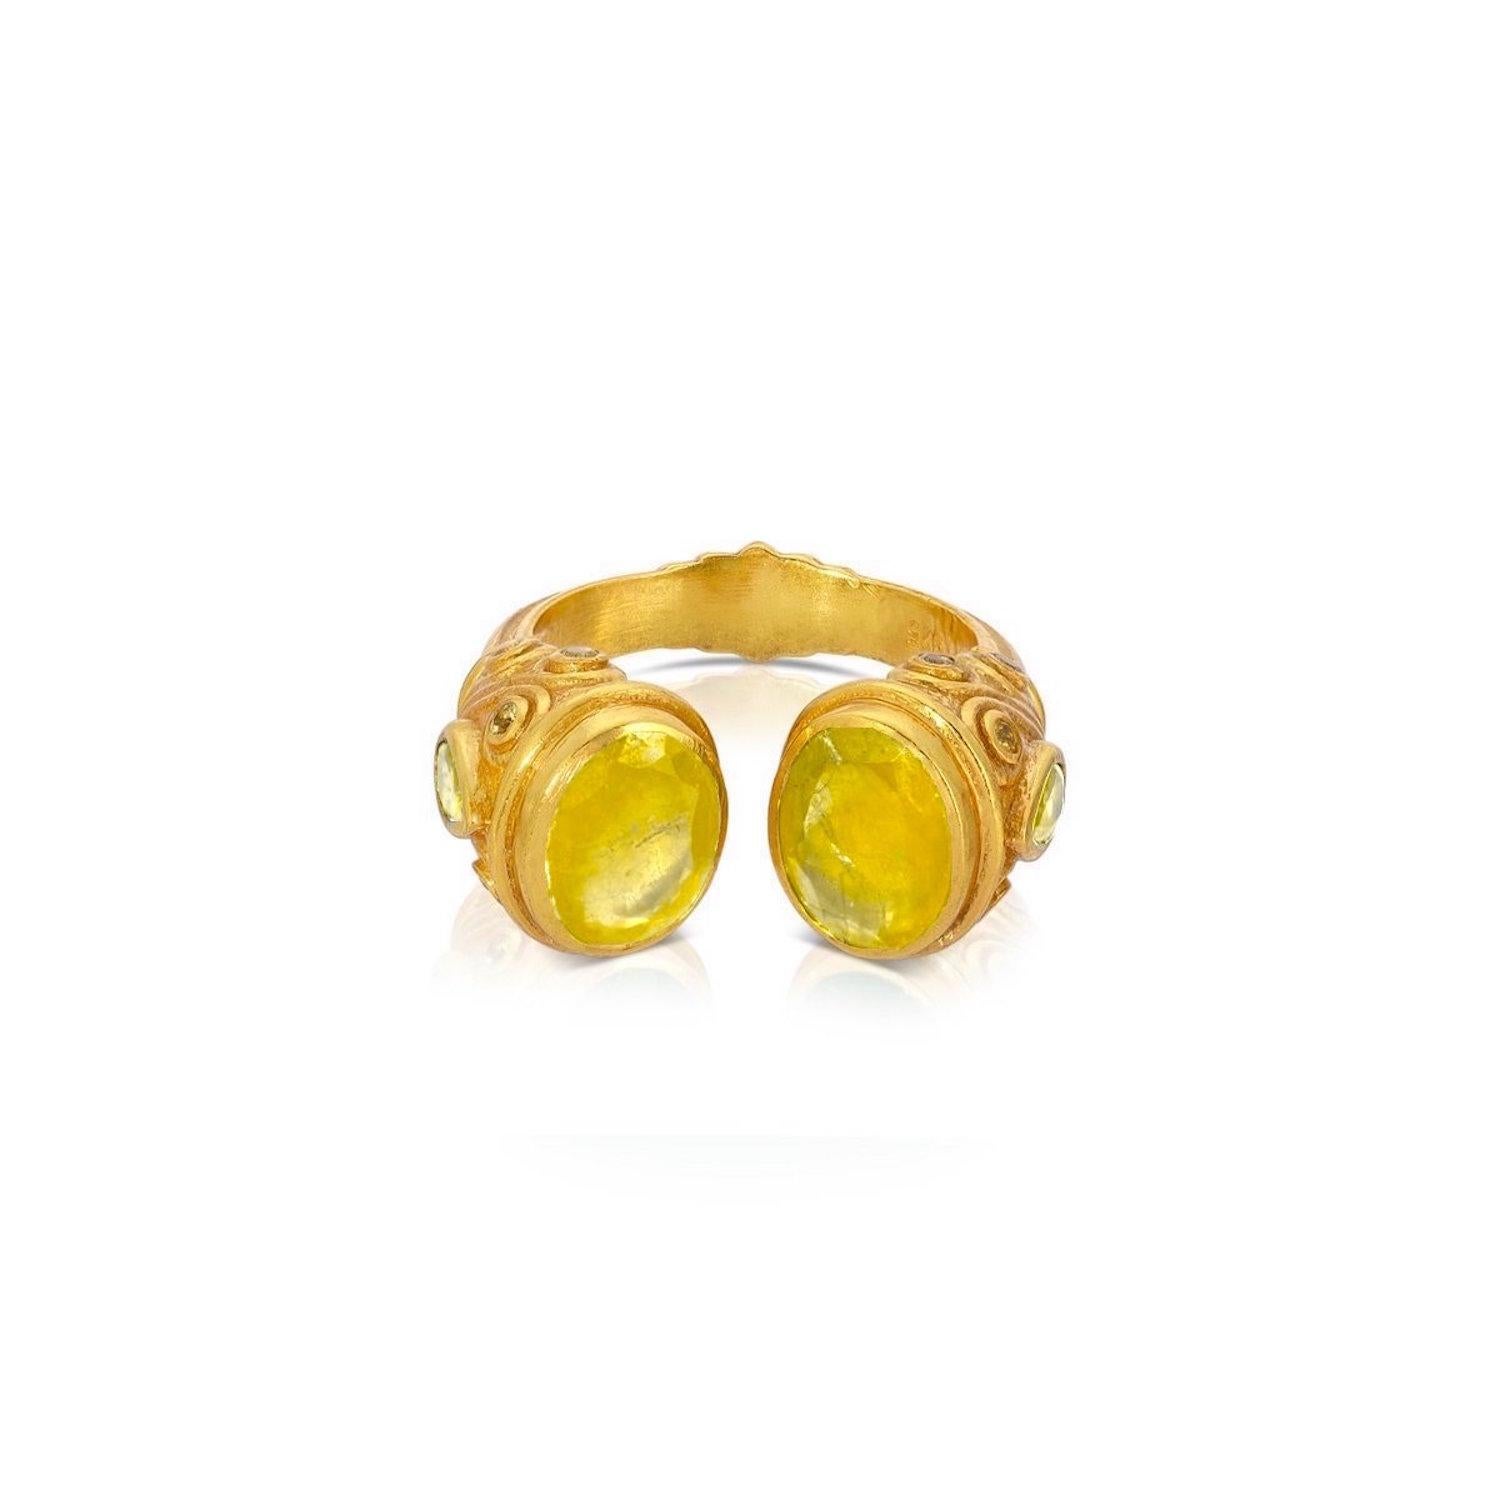 A contemporary interpretation of the opulent jewelry style of the Moguls. A Yellow Sapphire ring featuring an open ended band tipped with Yellow Sapphires and pear shaped gemstones on the side of the ring. This gorgeous ring features 3.85 Carats of